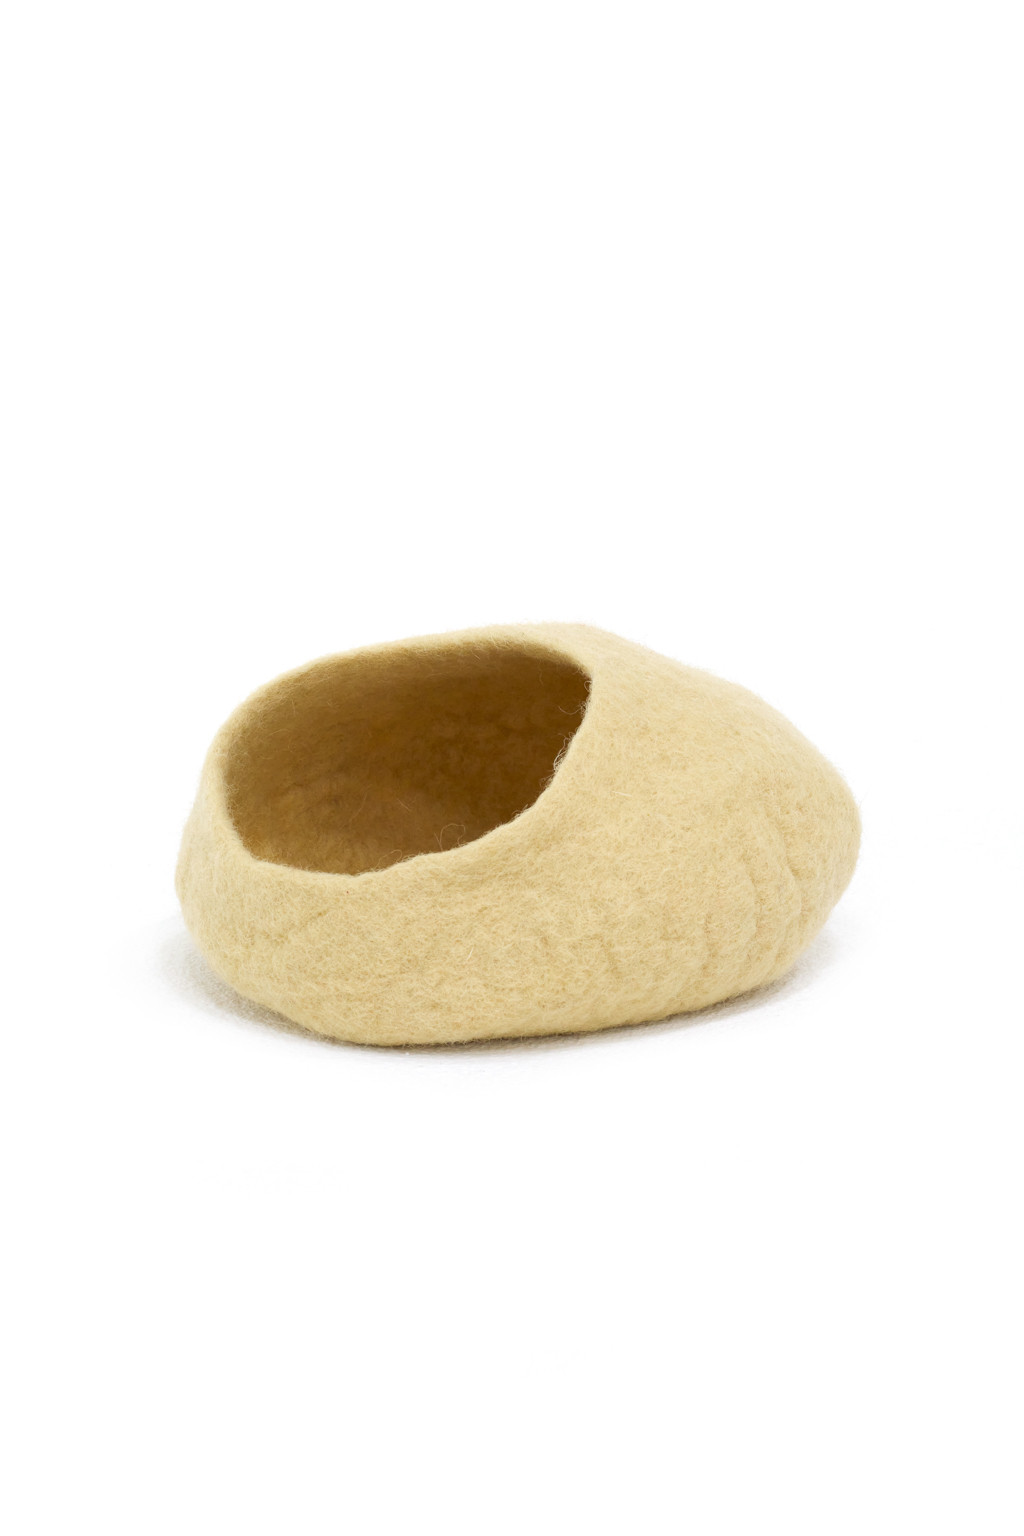 COCOON BOWL